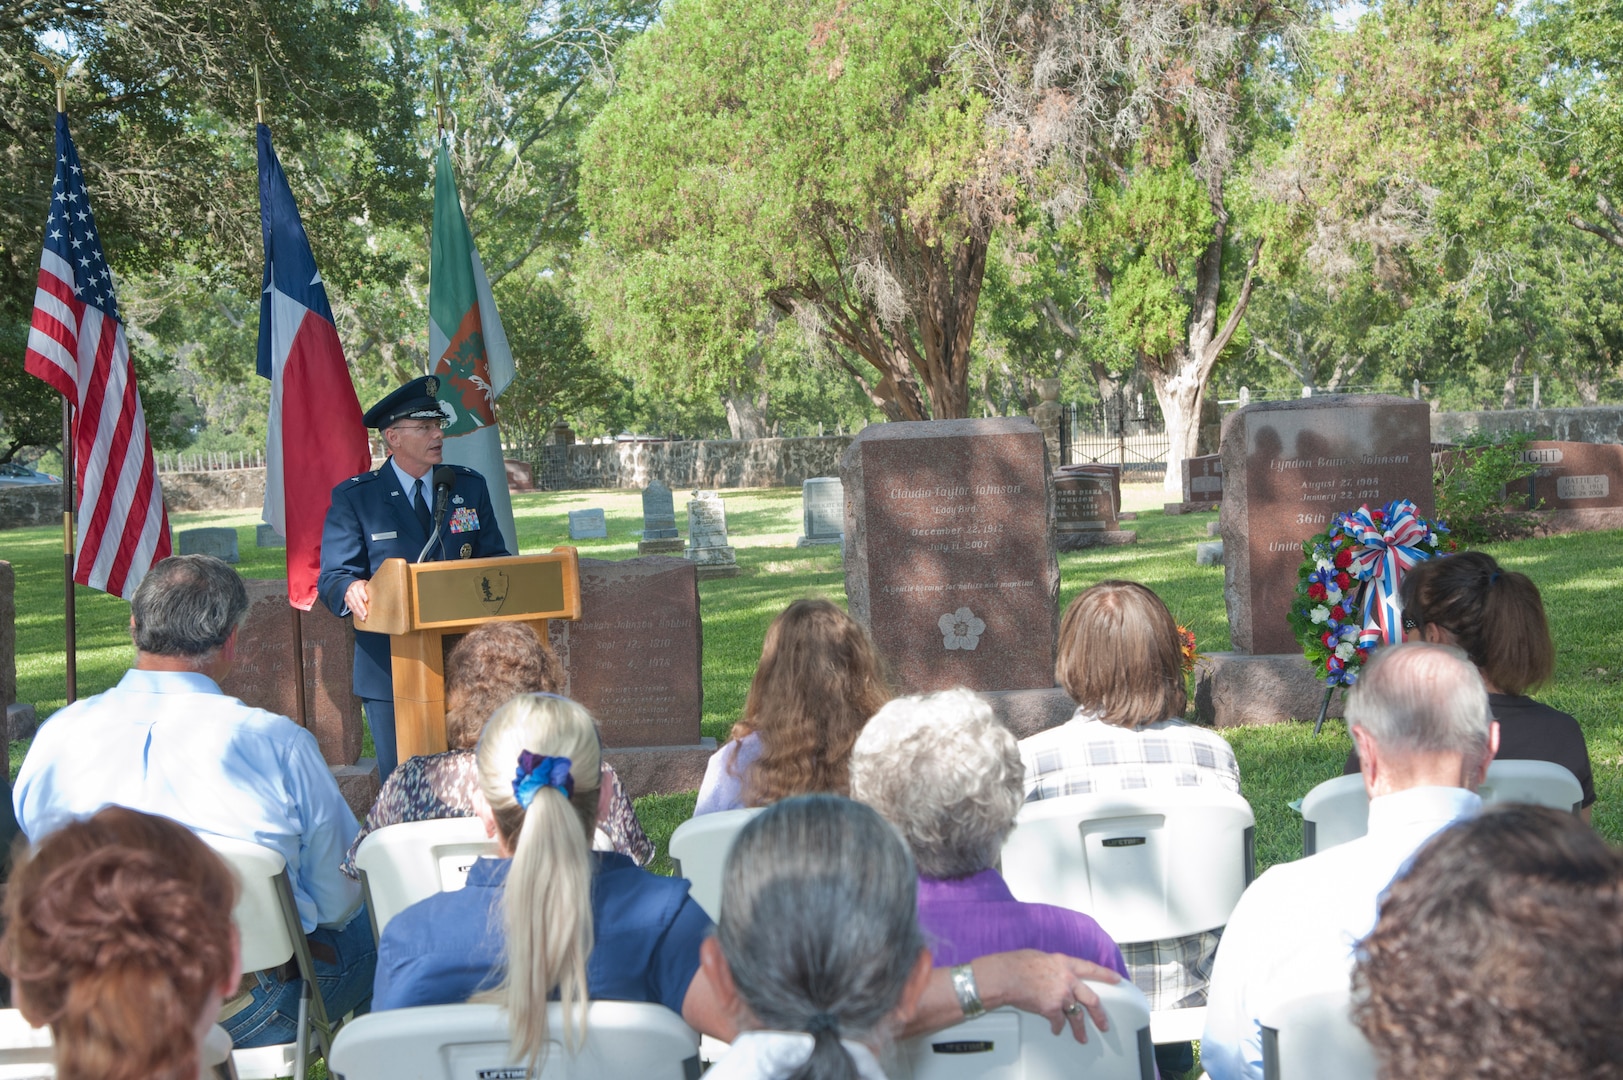 Brig. Gen. Bob LaBrutta, 502nd Air Base Wing and Joint Base San Antonio commander, speaks at the Lyndon B. Johnson birthday observance wreath-laying ceremony Aug. 27 at the LBJ National Historical Park in Johnson City, Texas. (U.S. Air Force photo by Airman 1st Class Stormy Archer)